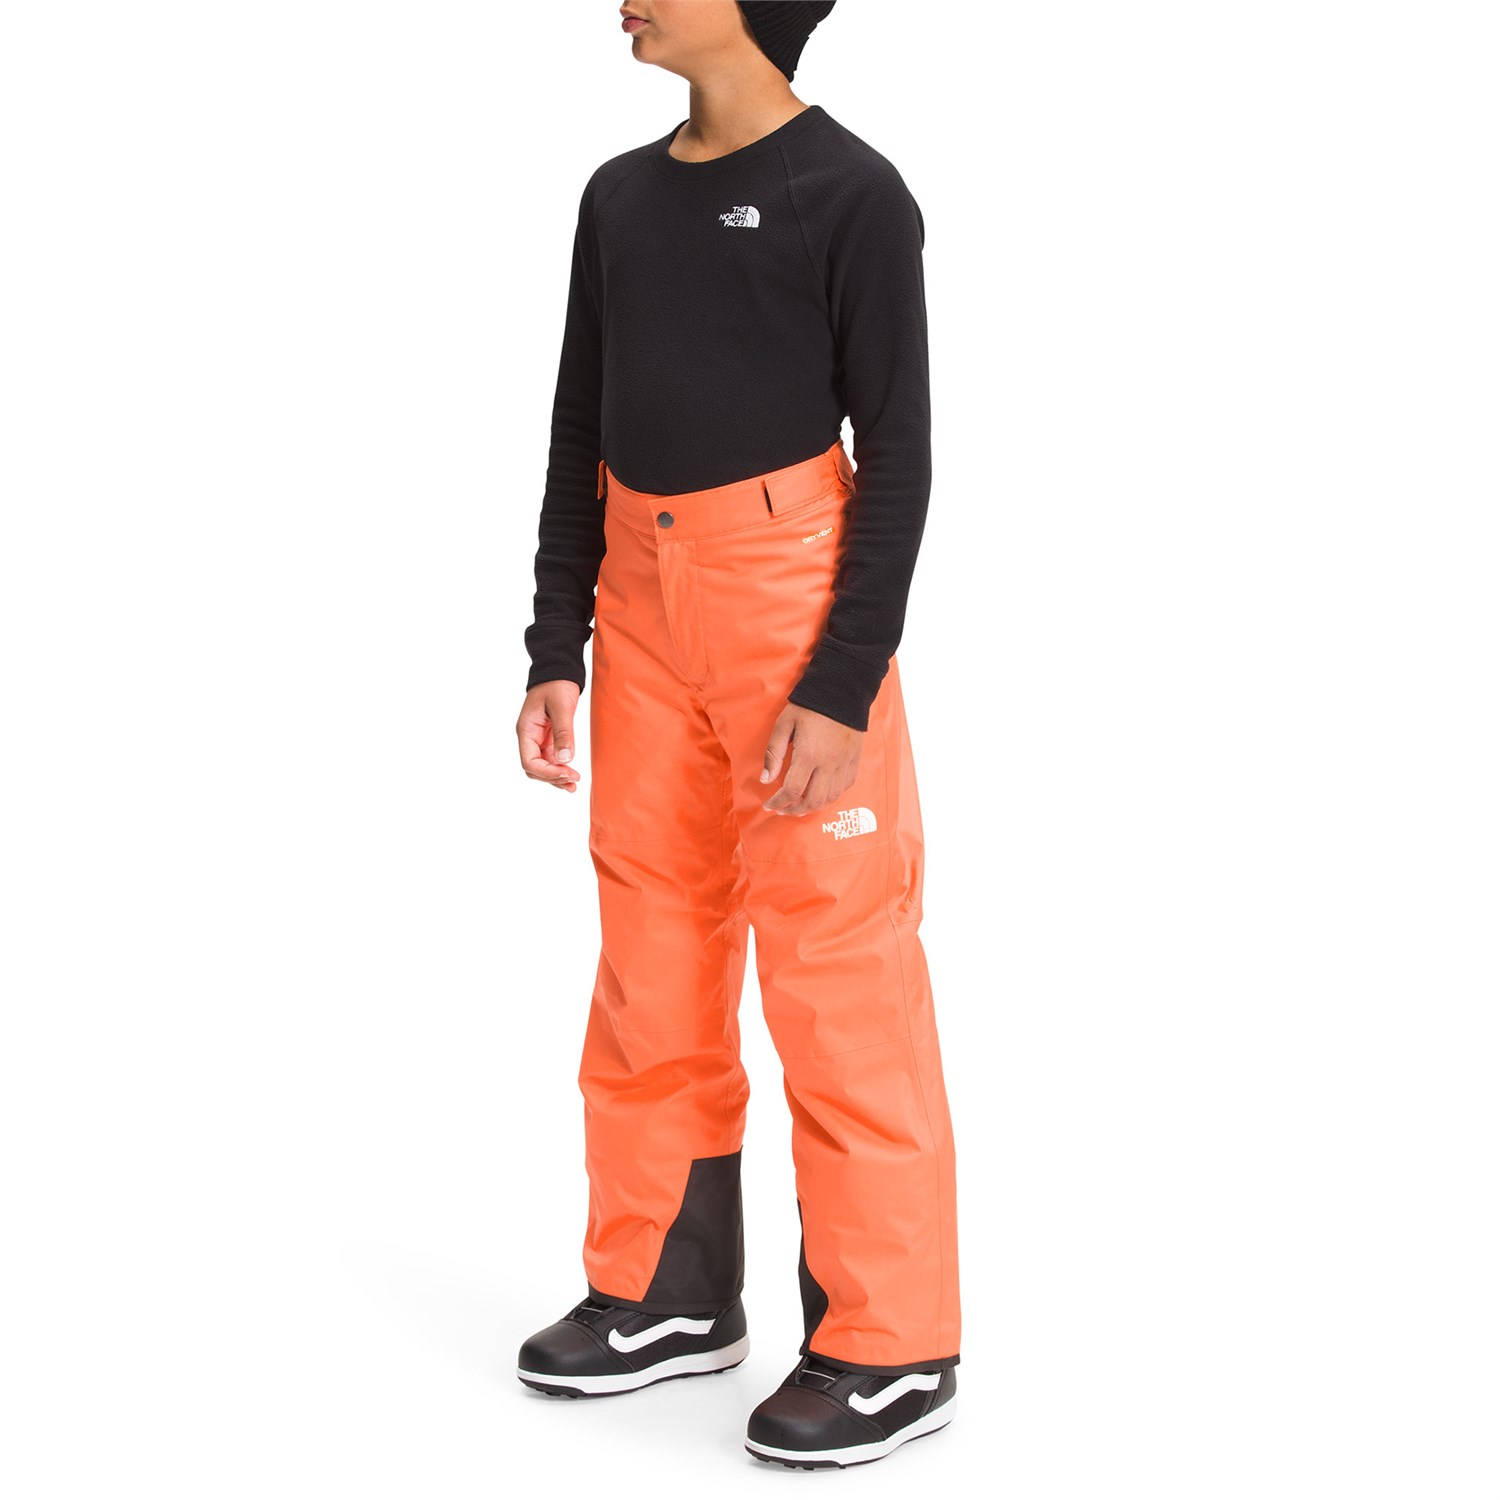 Men’s Freedom Insulated Pants | The North Face Canada